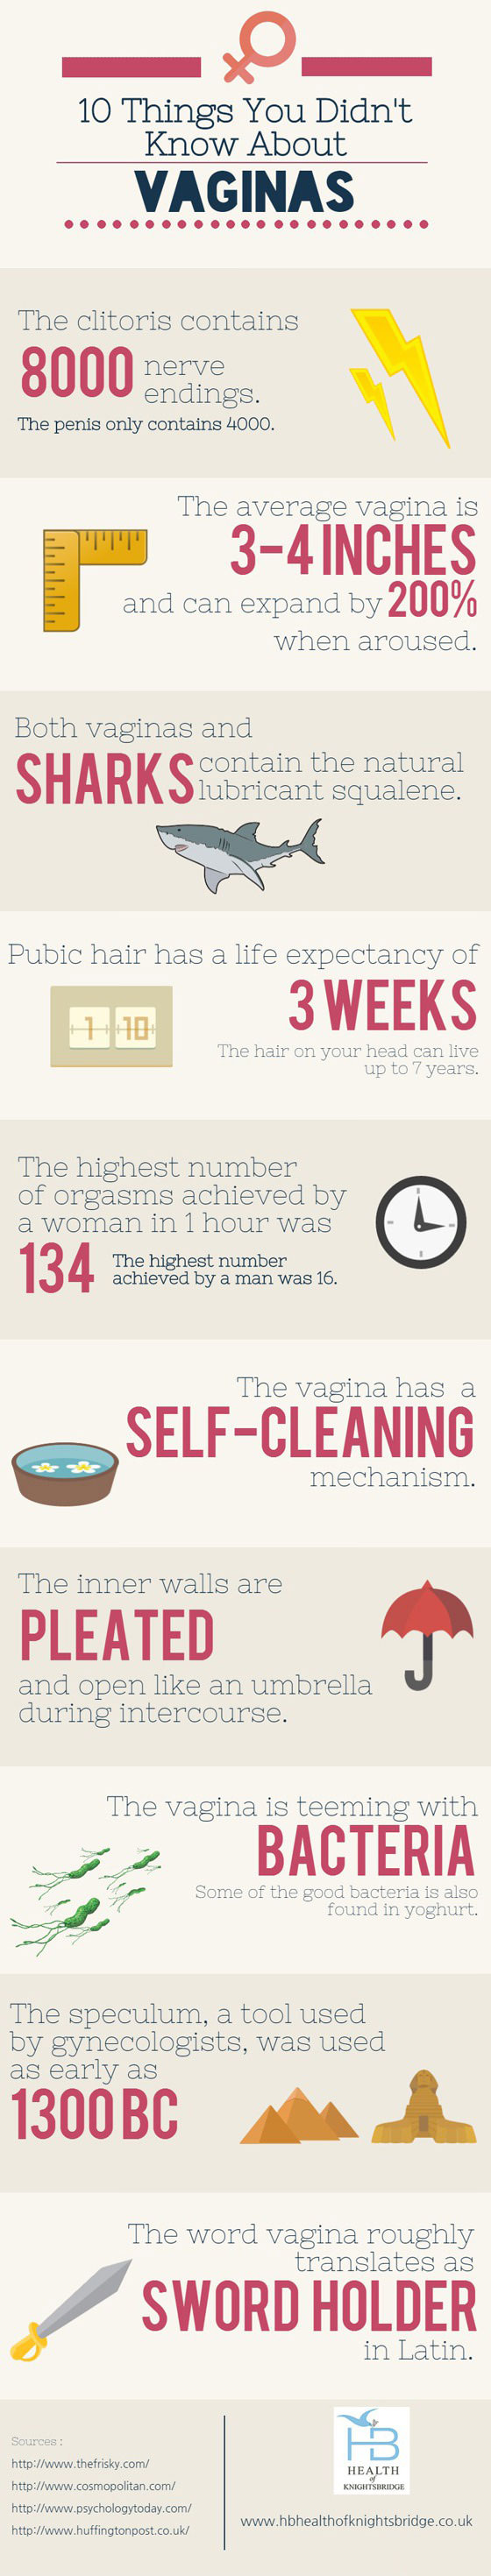 10 things you didn't know about vaginas, dye, facts